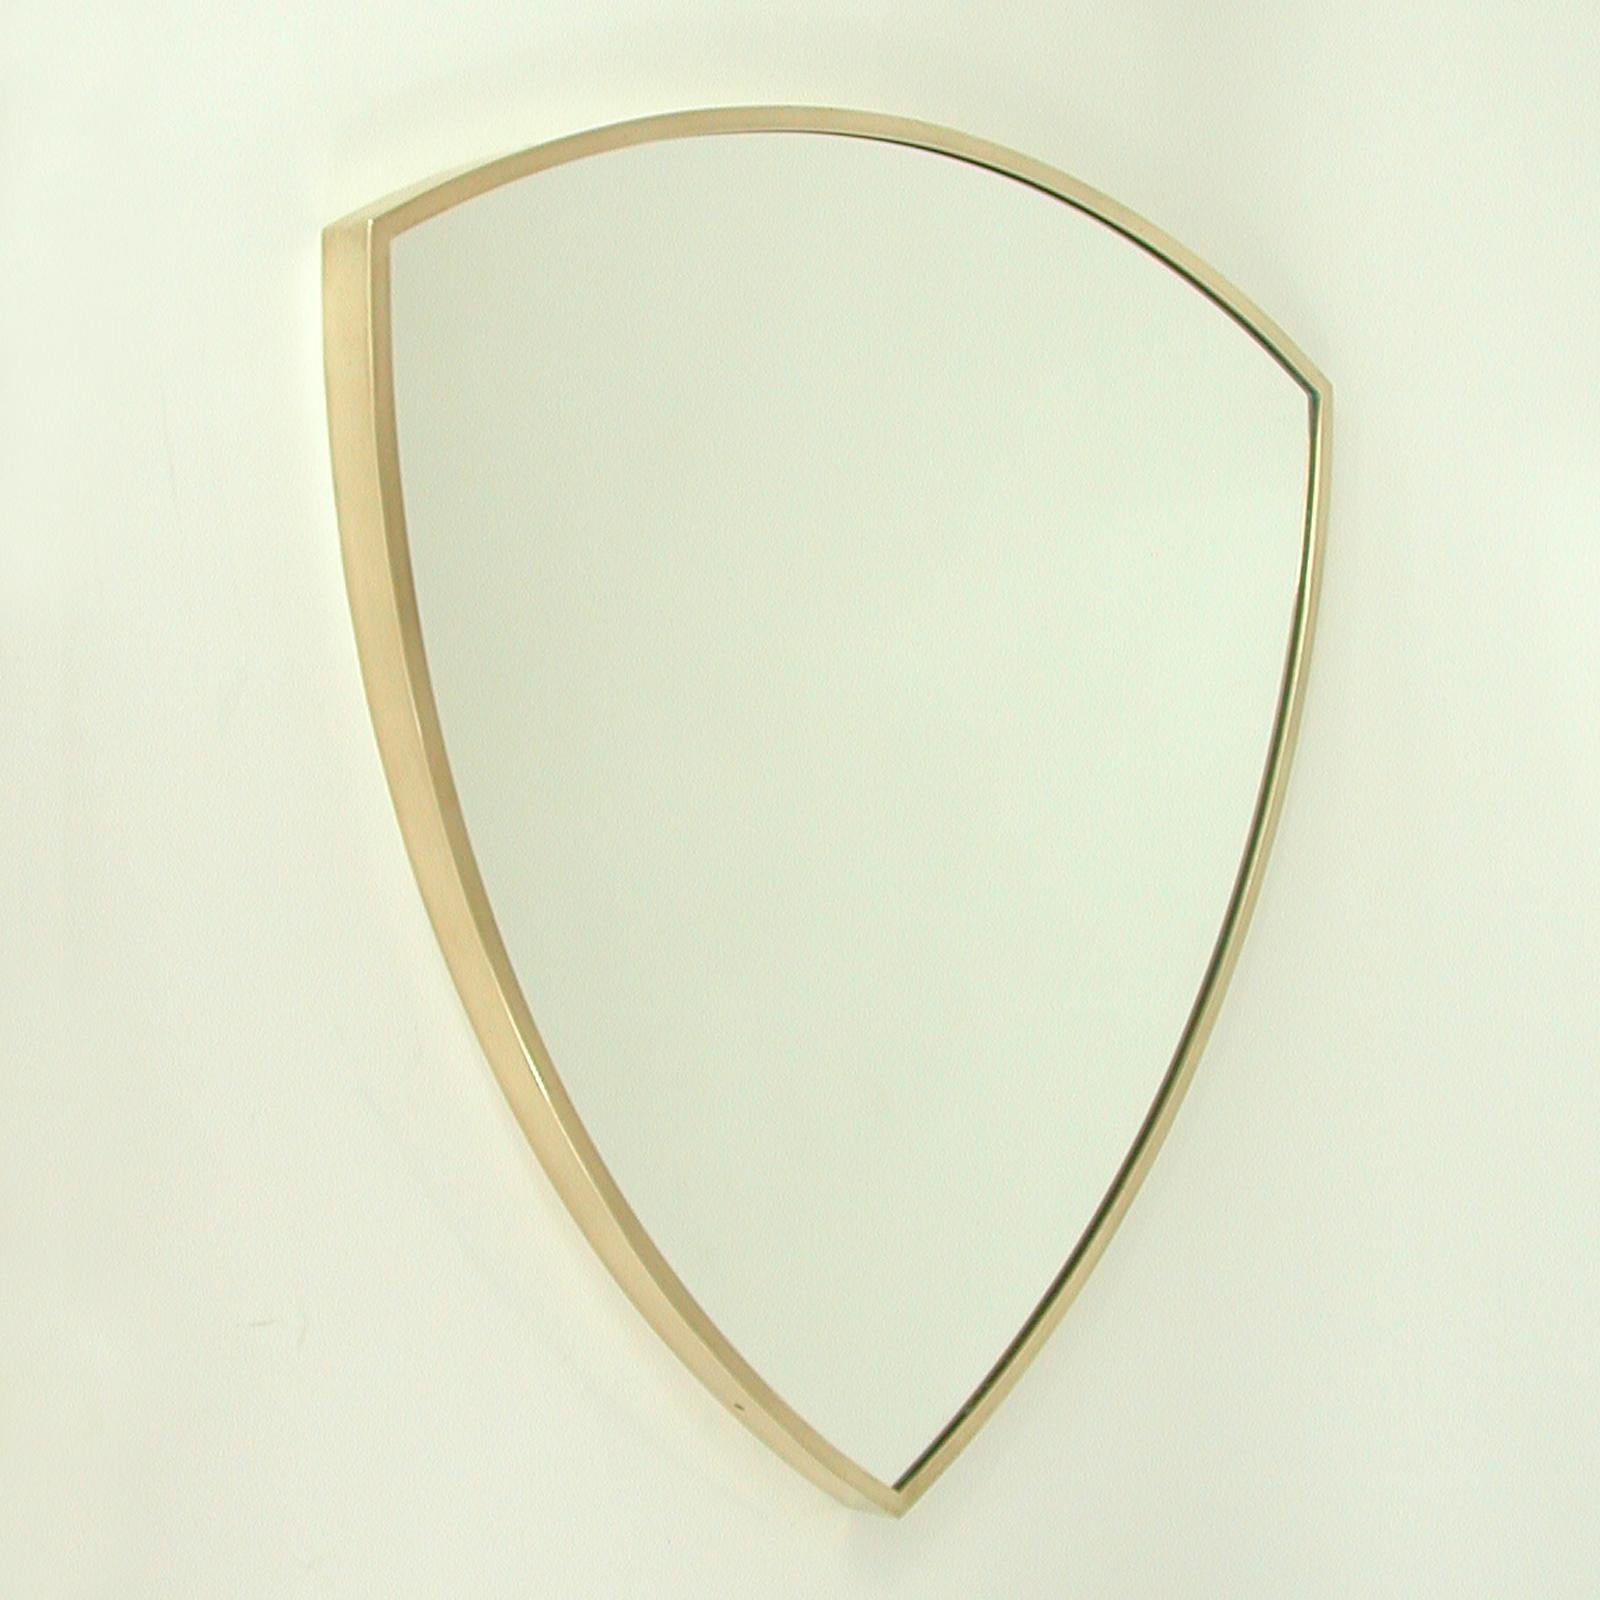 This minimalist shield shaped wall or fireplace mirror was designed and manufactured in Italy in the 1950s. It features a solid brass frame with mirror glass and wooden rear.

Very good vintage condition with few signs of use and polished frame.